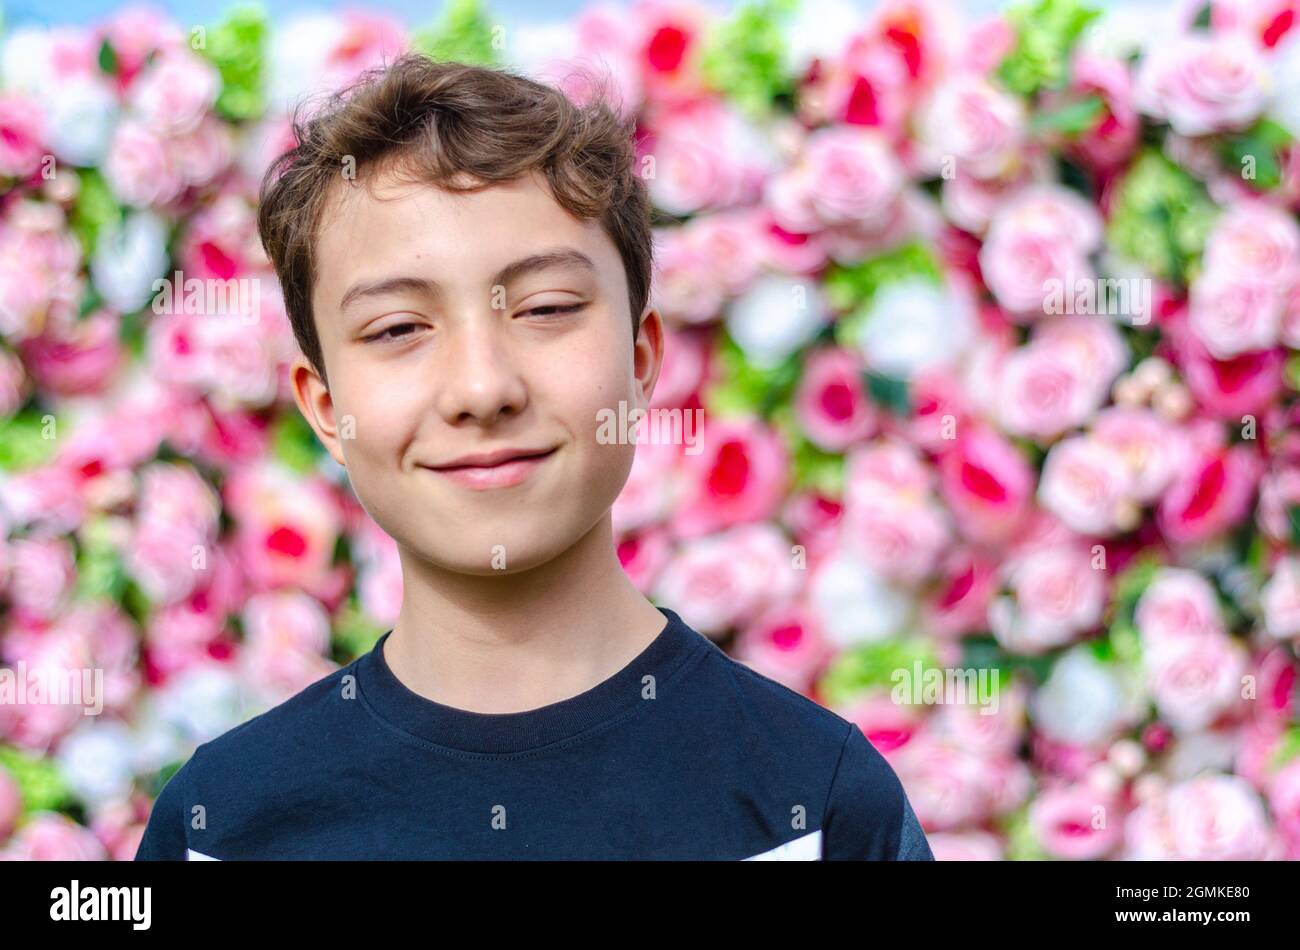 A portrait of a boy shot against a slower wall background. Stock Photo